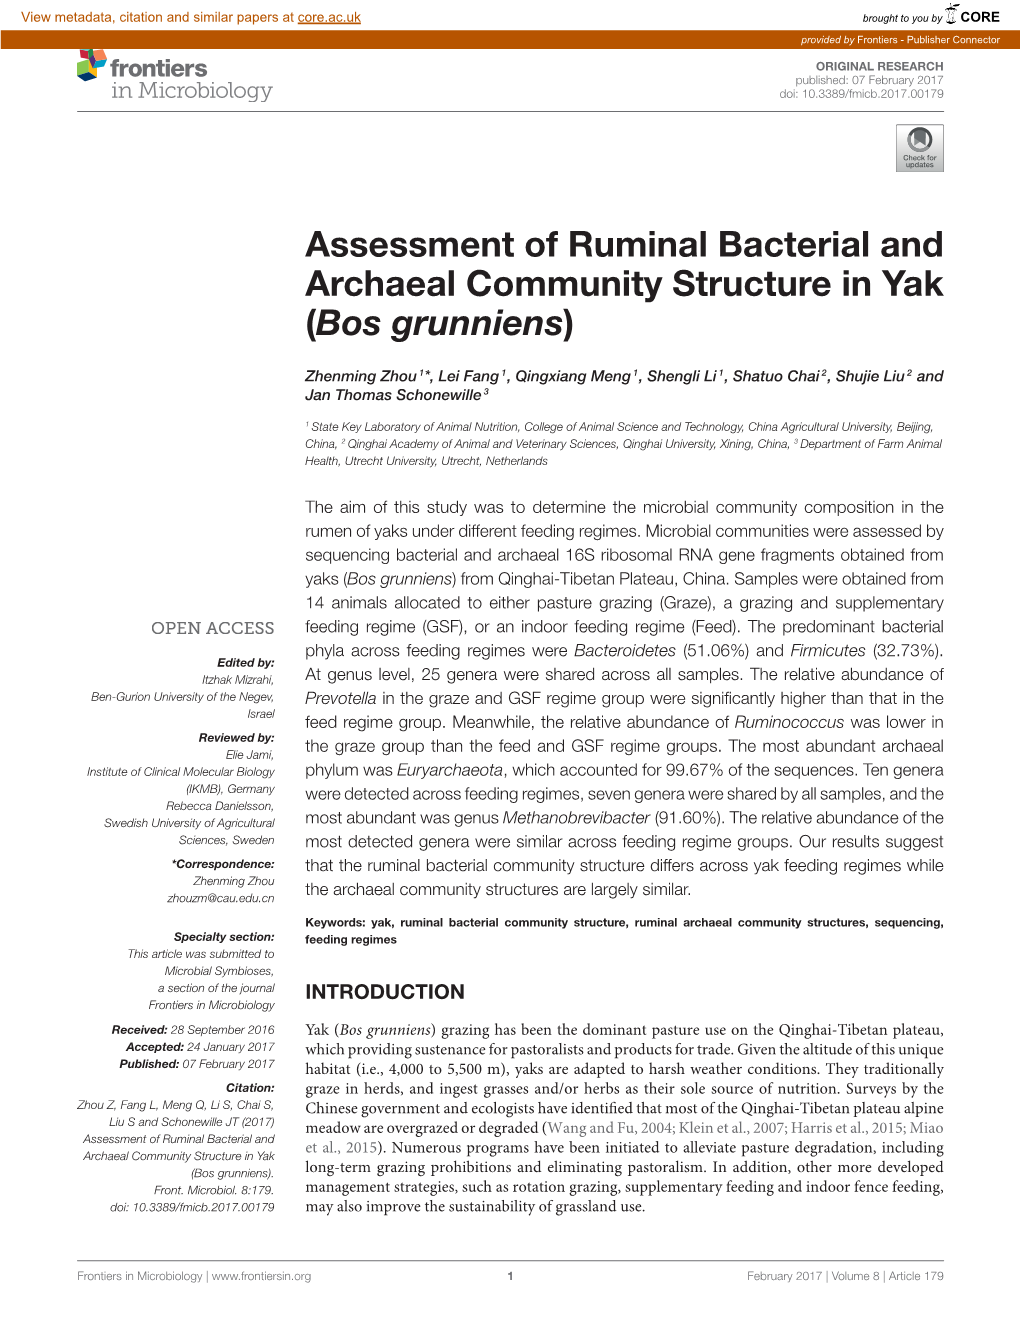 Assessment of Ruminal Bacterial and Archaeal Community Structure in Yak (Bos Grunniens)